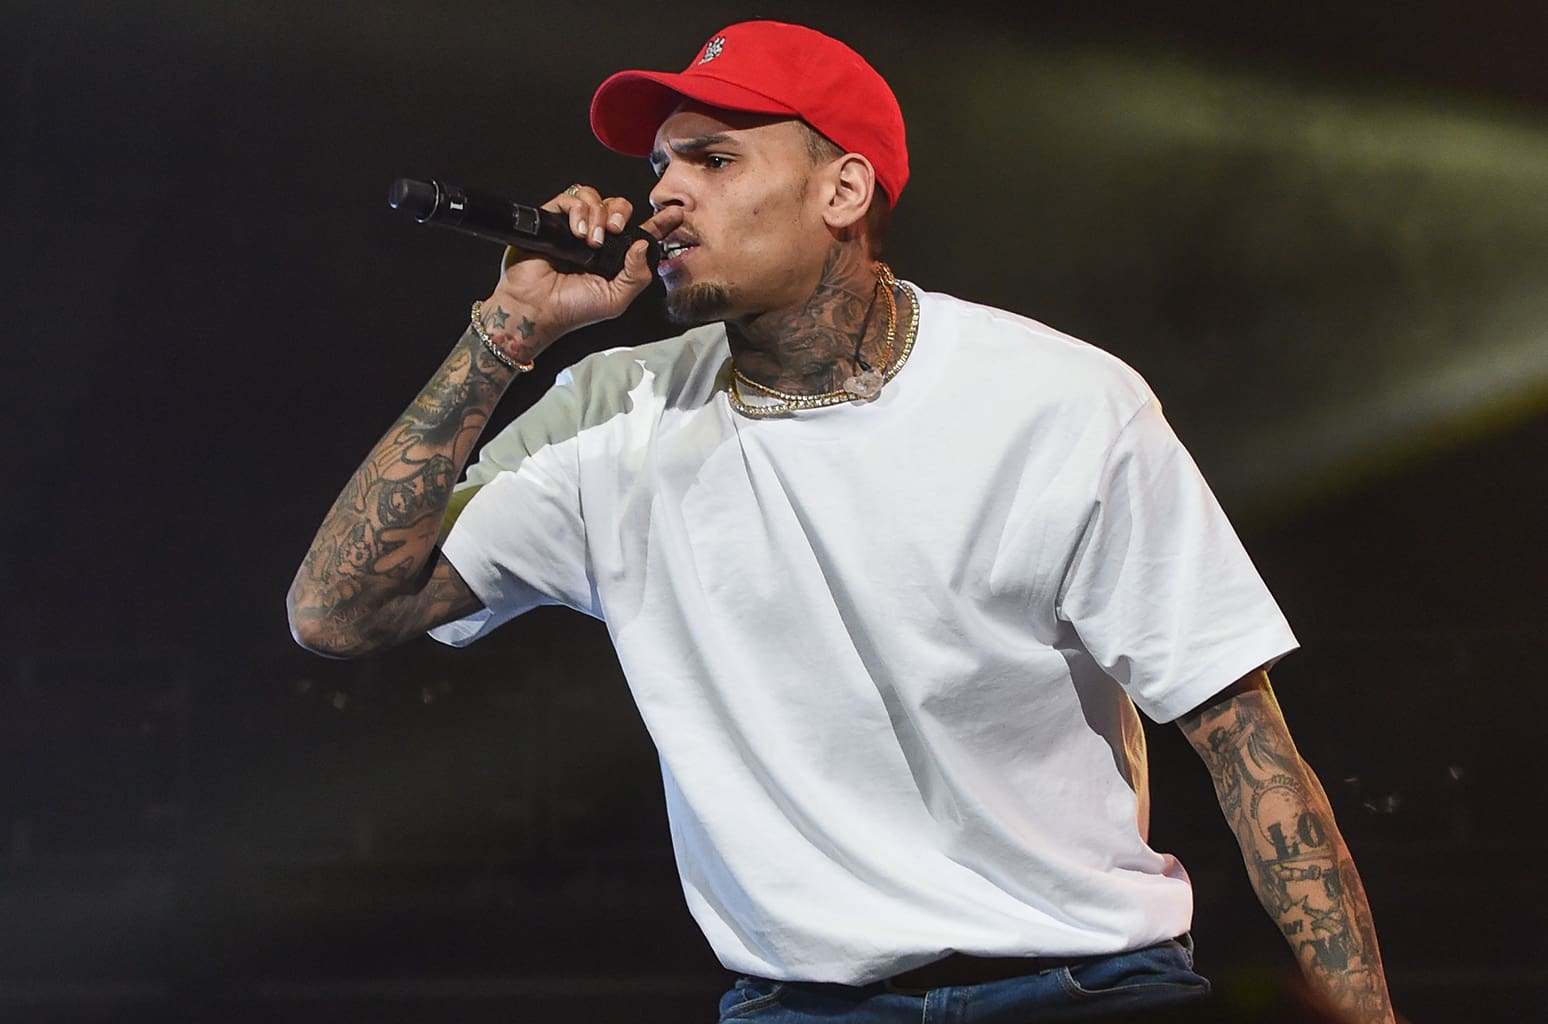 Chris Brown Is Reportedly Hit With Criminal Charges - Check Out The Reason